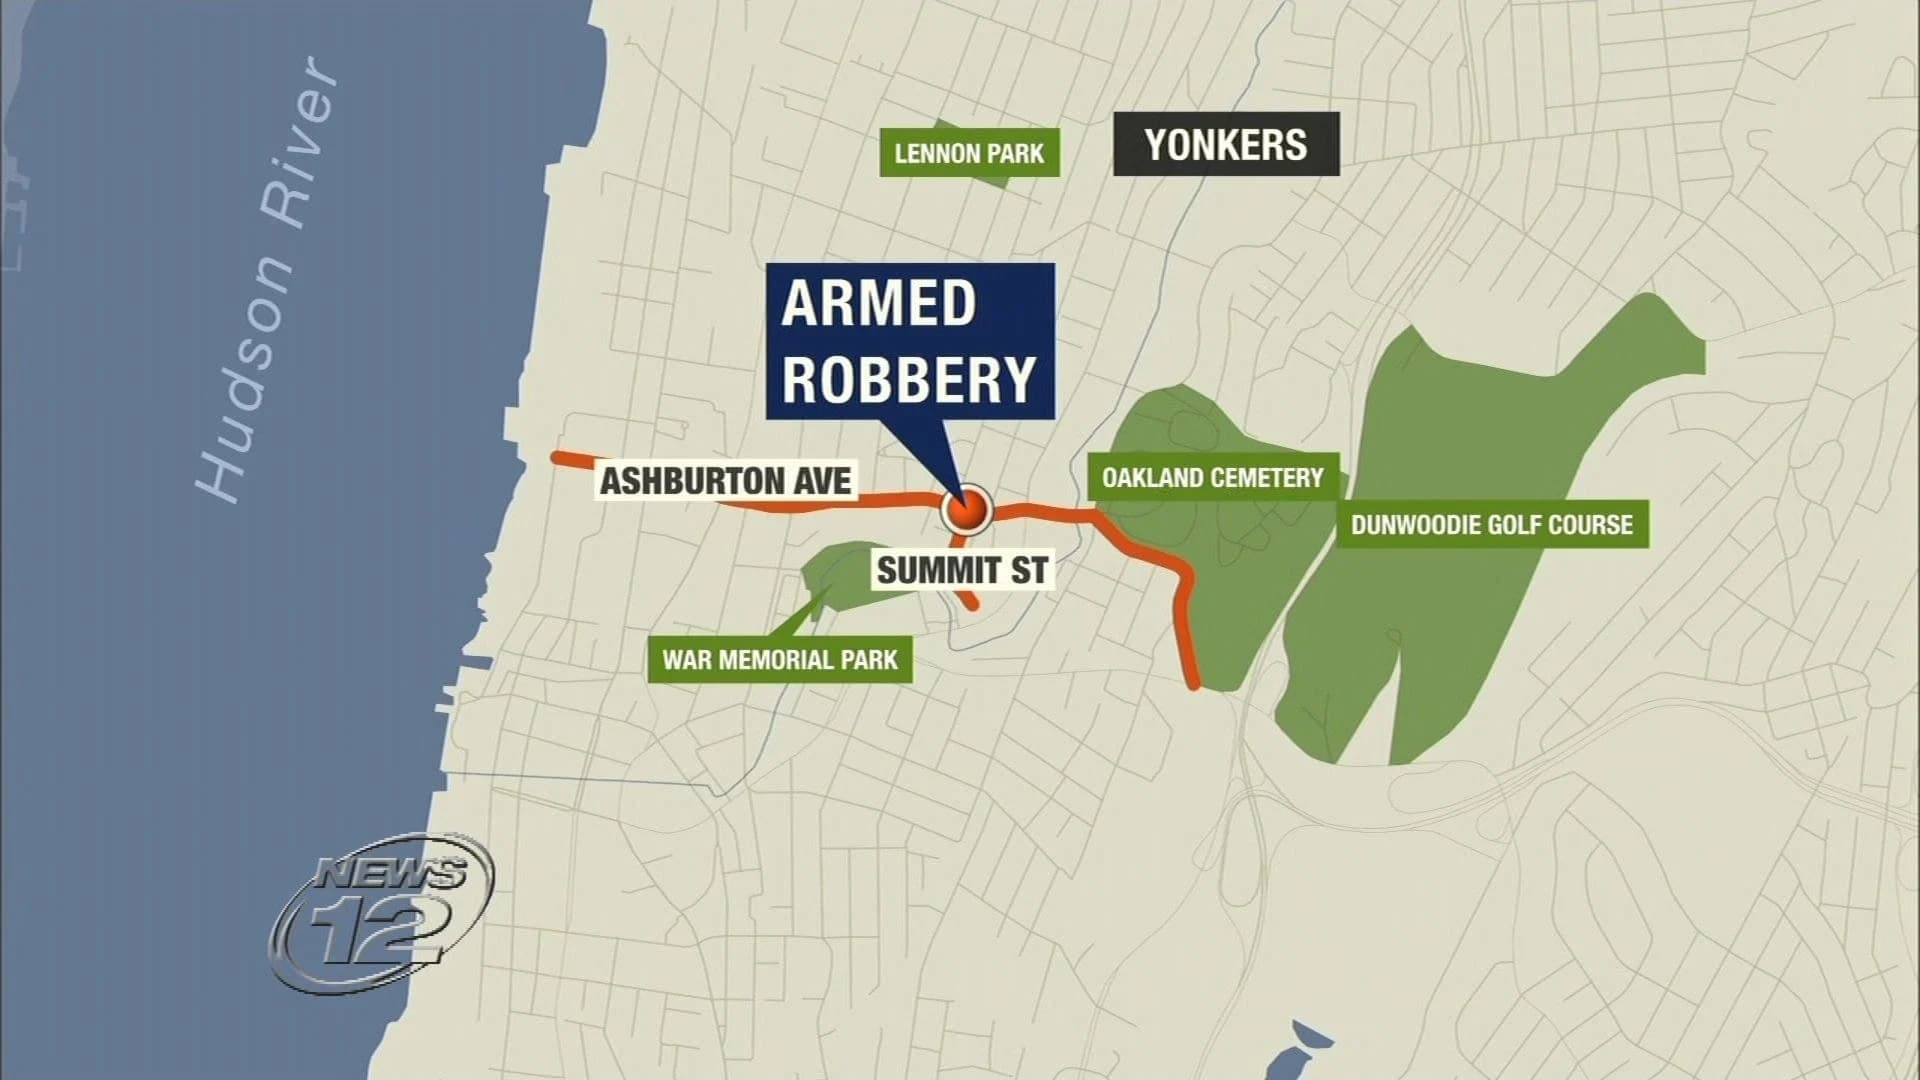 Suspect charged in Yonkers armed robbery